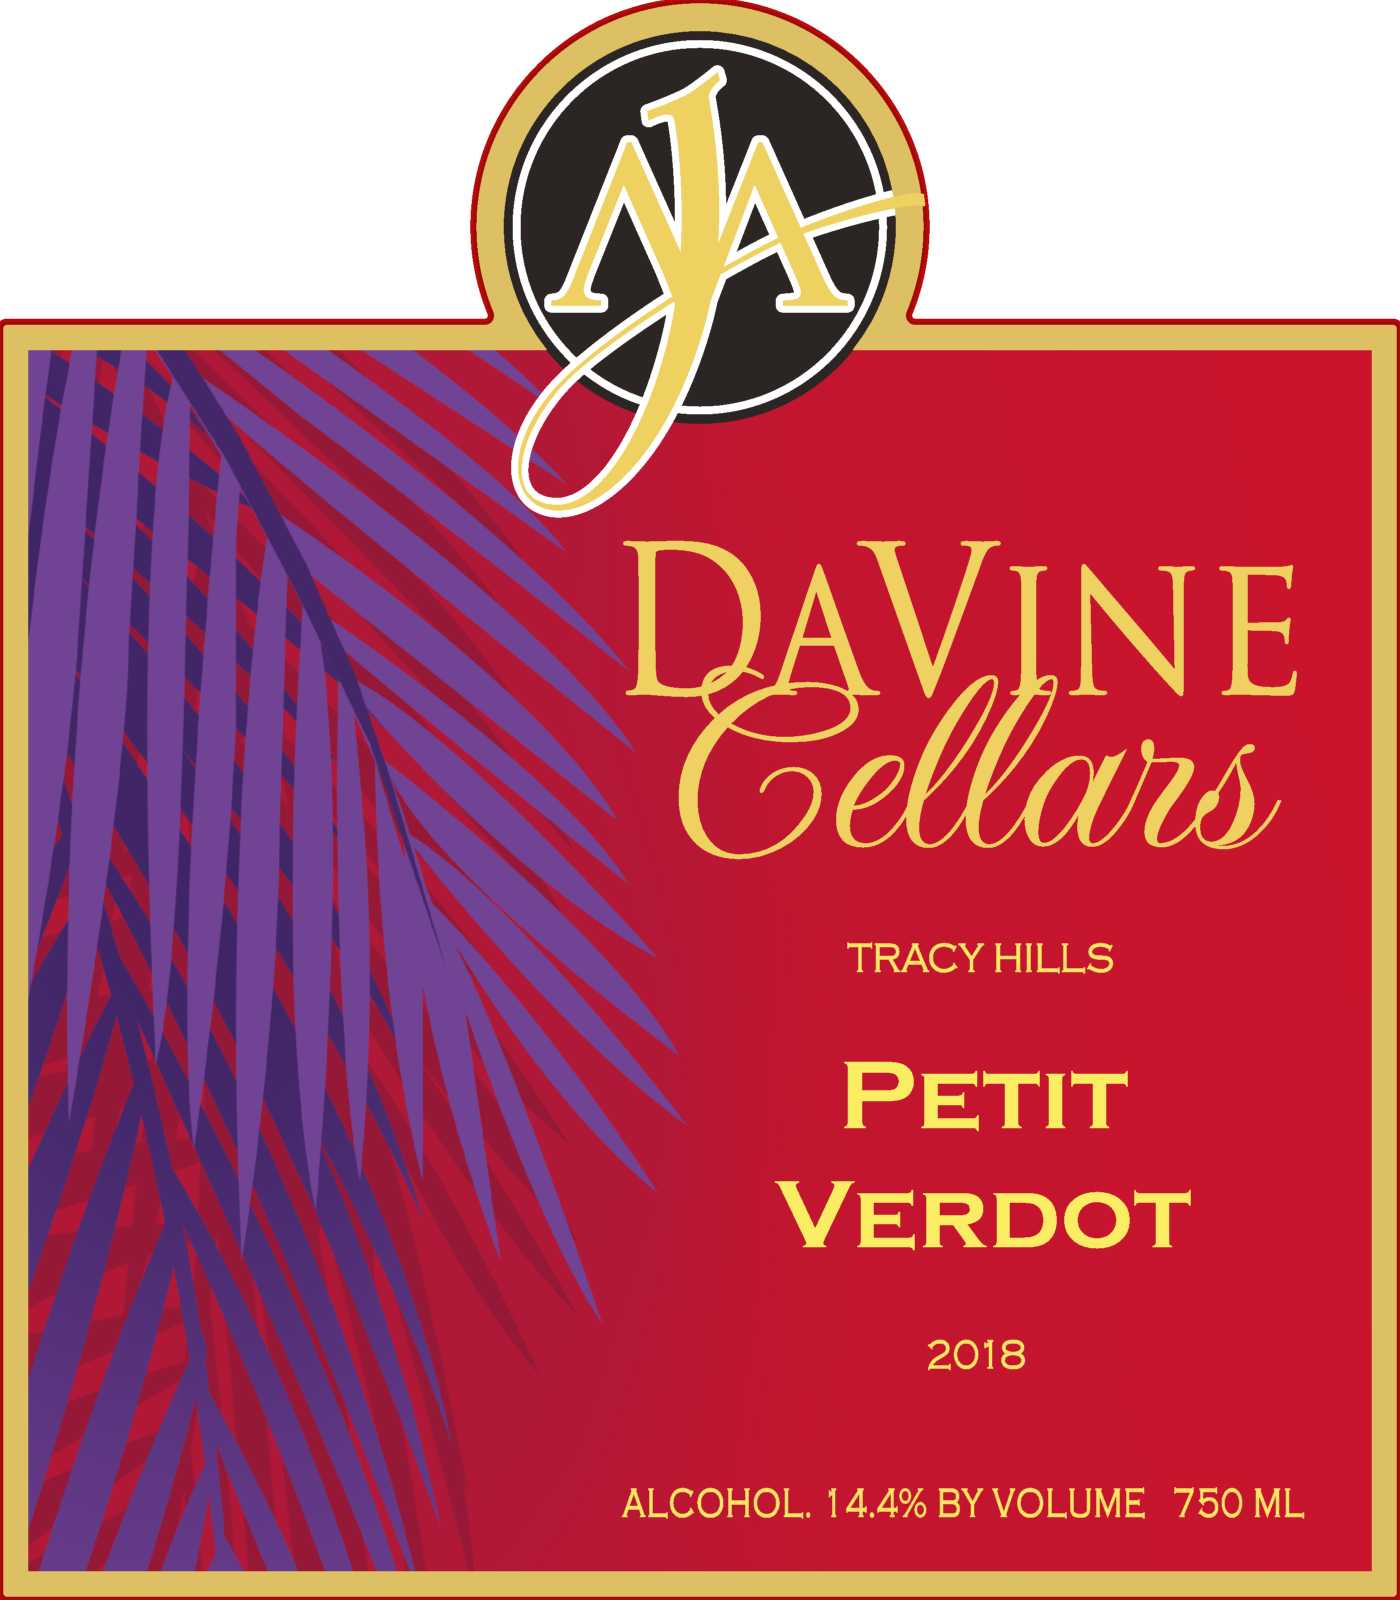 Product Image for 2018 Tracy Hills Petit Verdot "Cabrón"